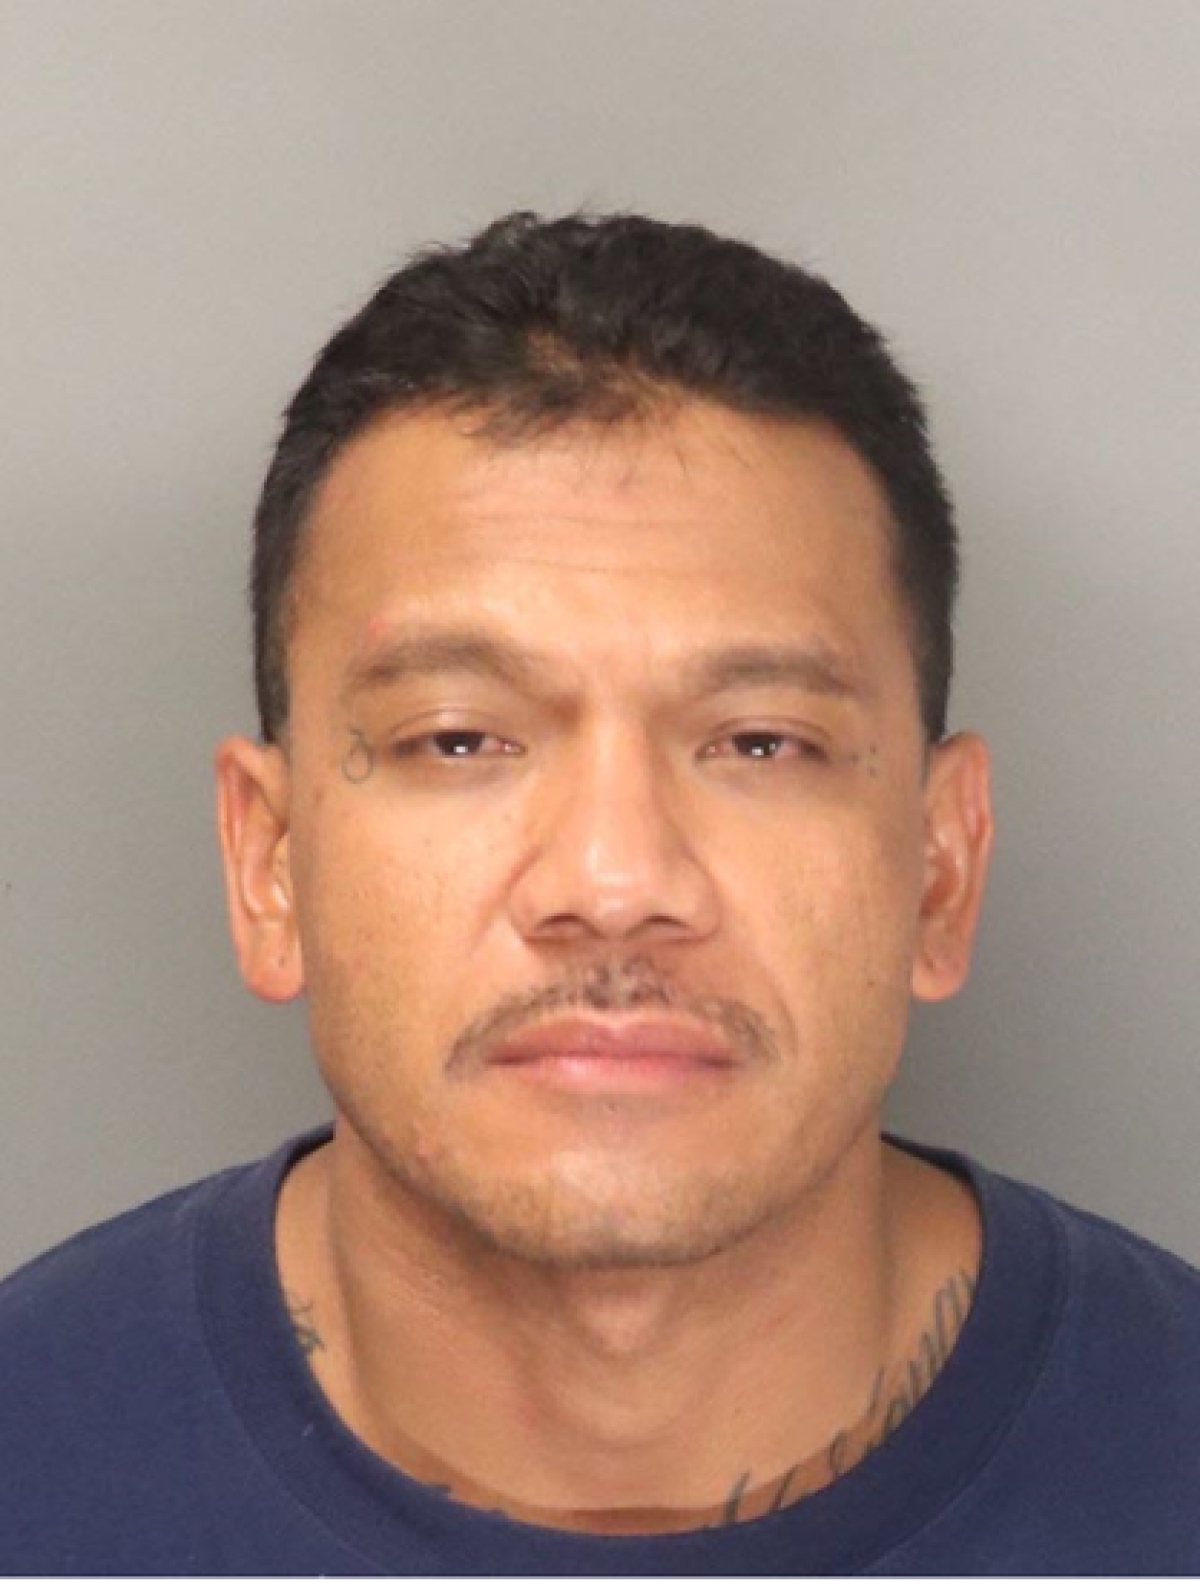 Police had been looking for Christopher Templo Marquez, 36, in connection with shootings in Chula Vista and National City.